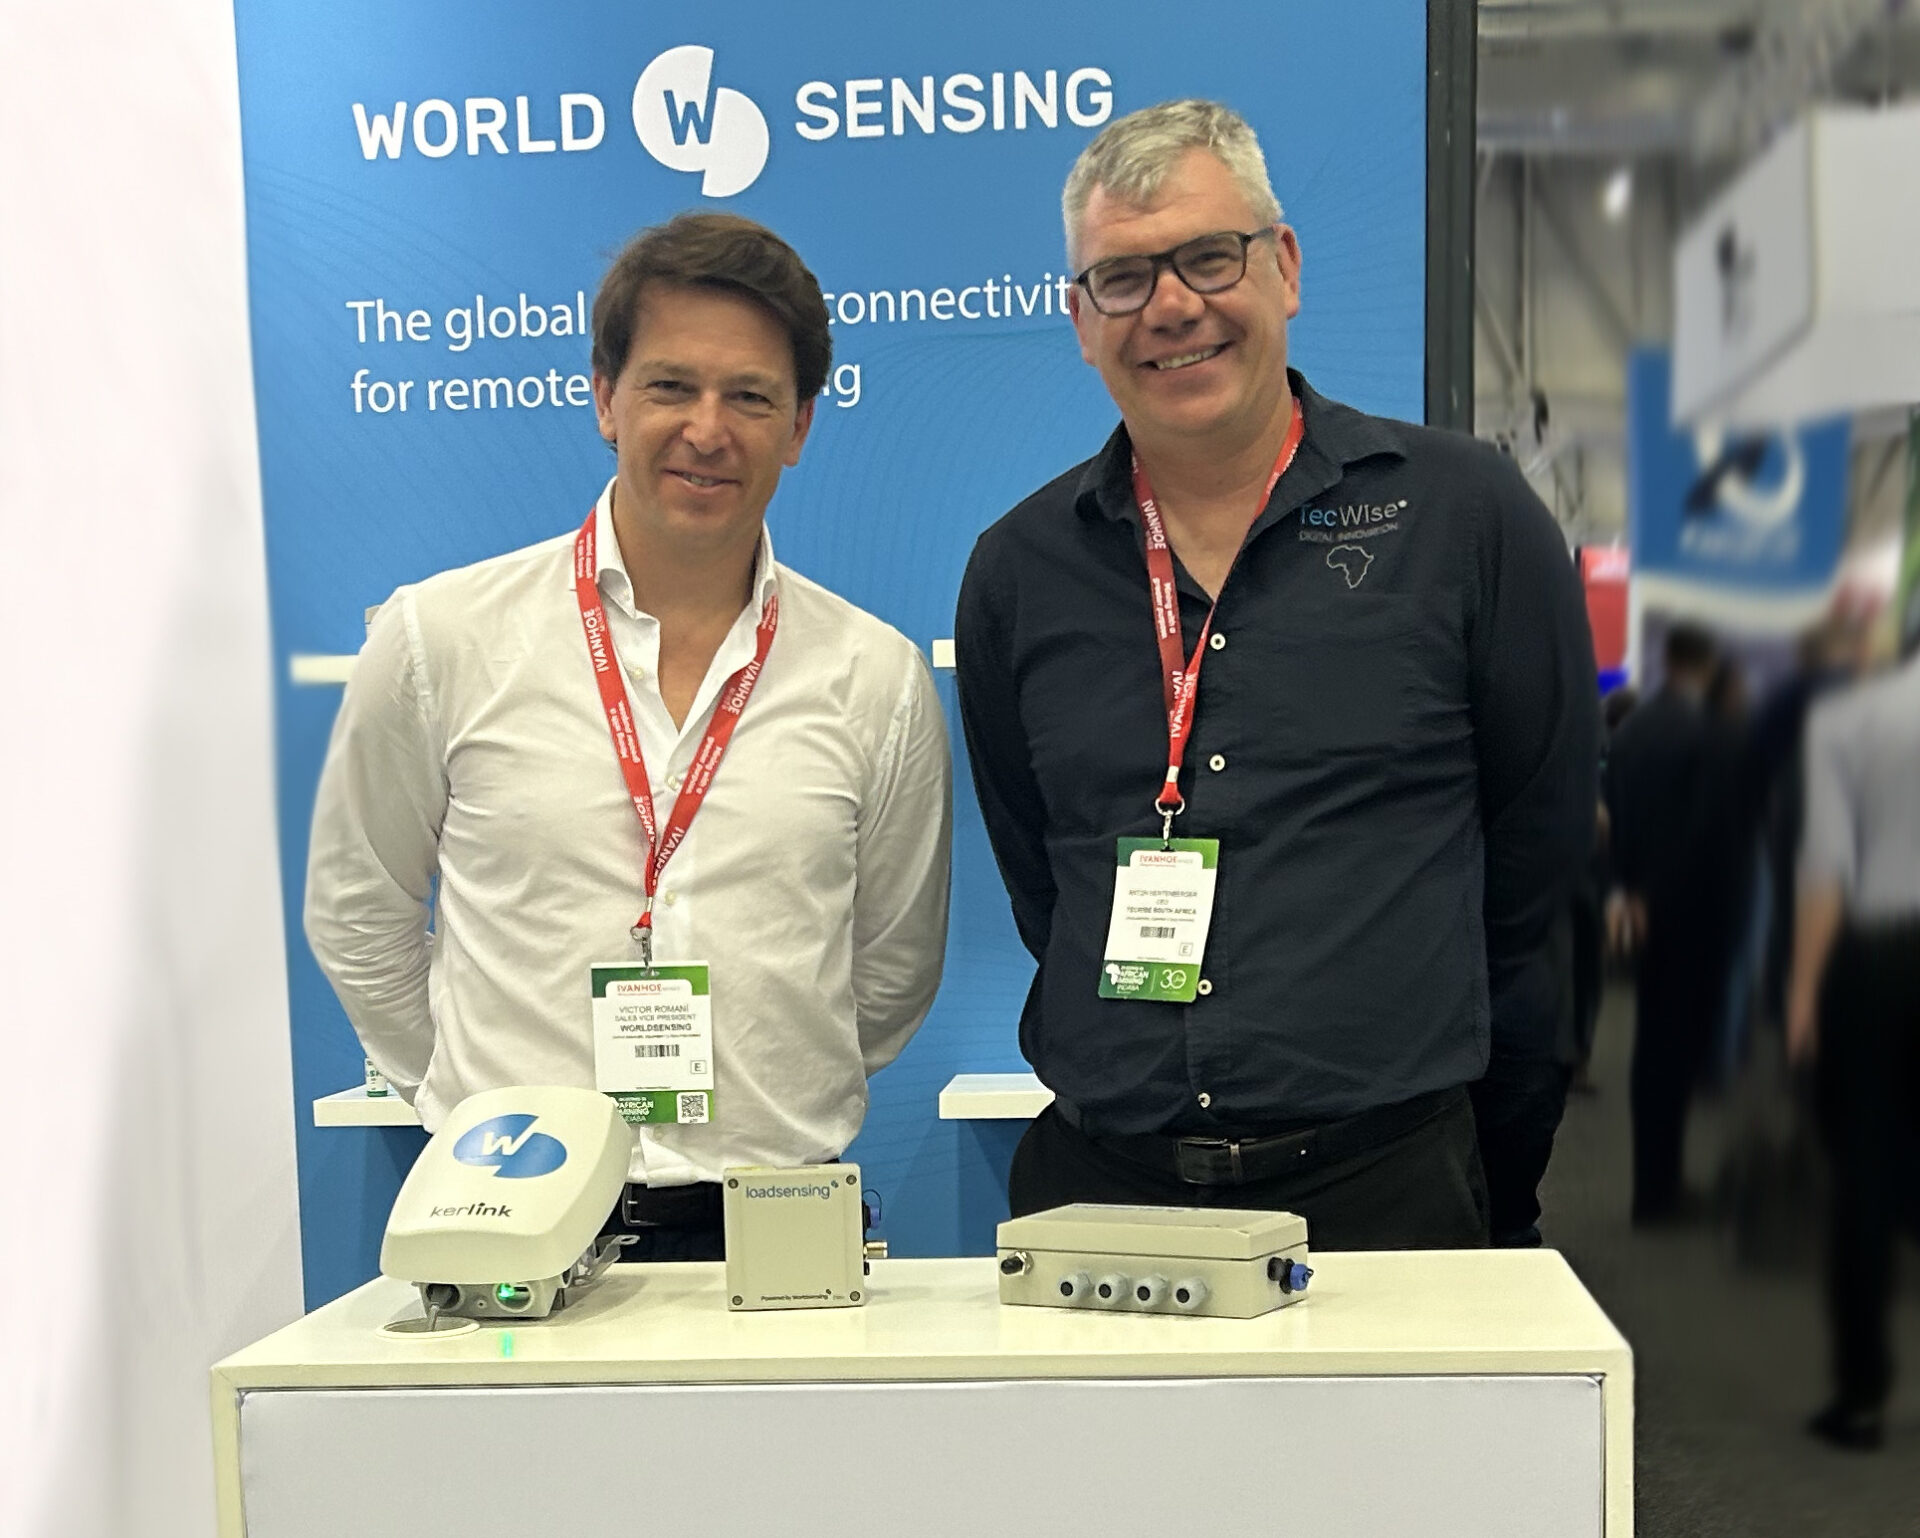 Worldsensing forges new partnership with TecWise/Comms International Group